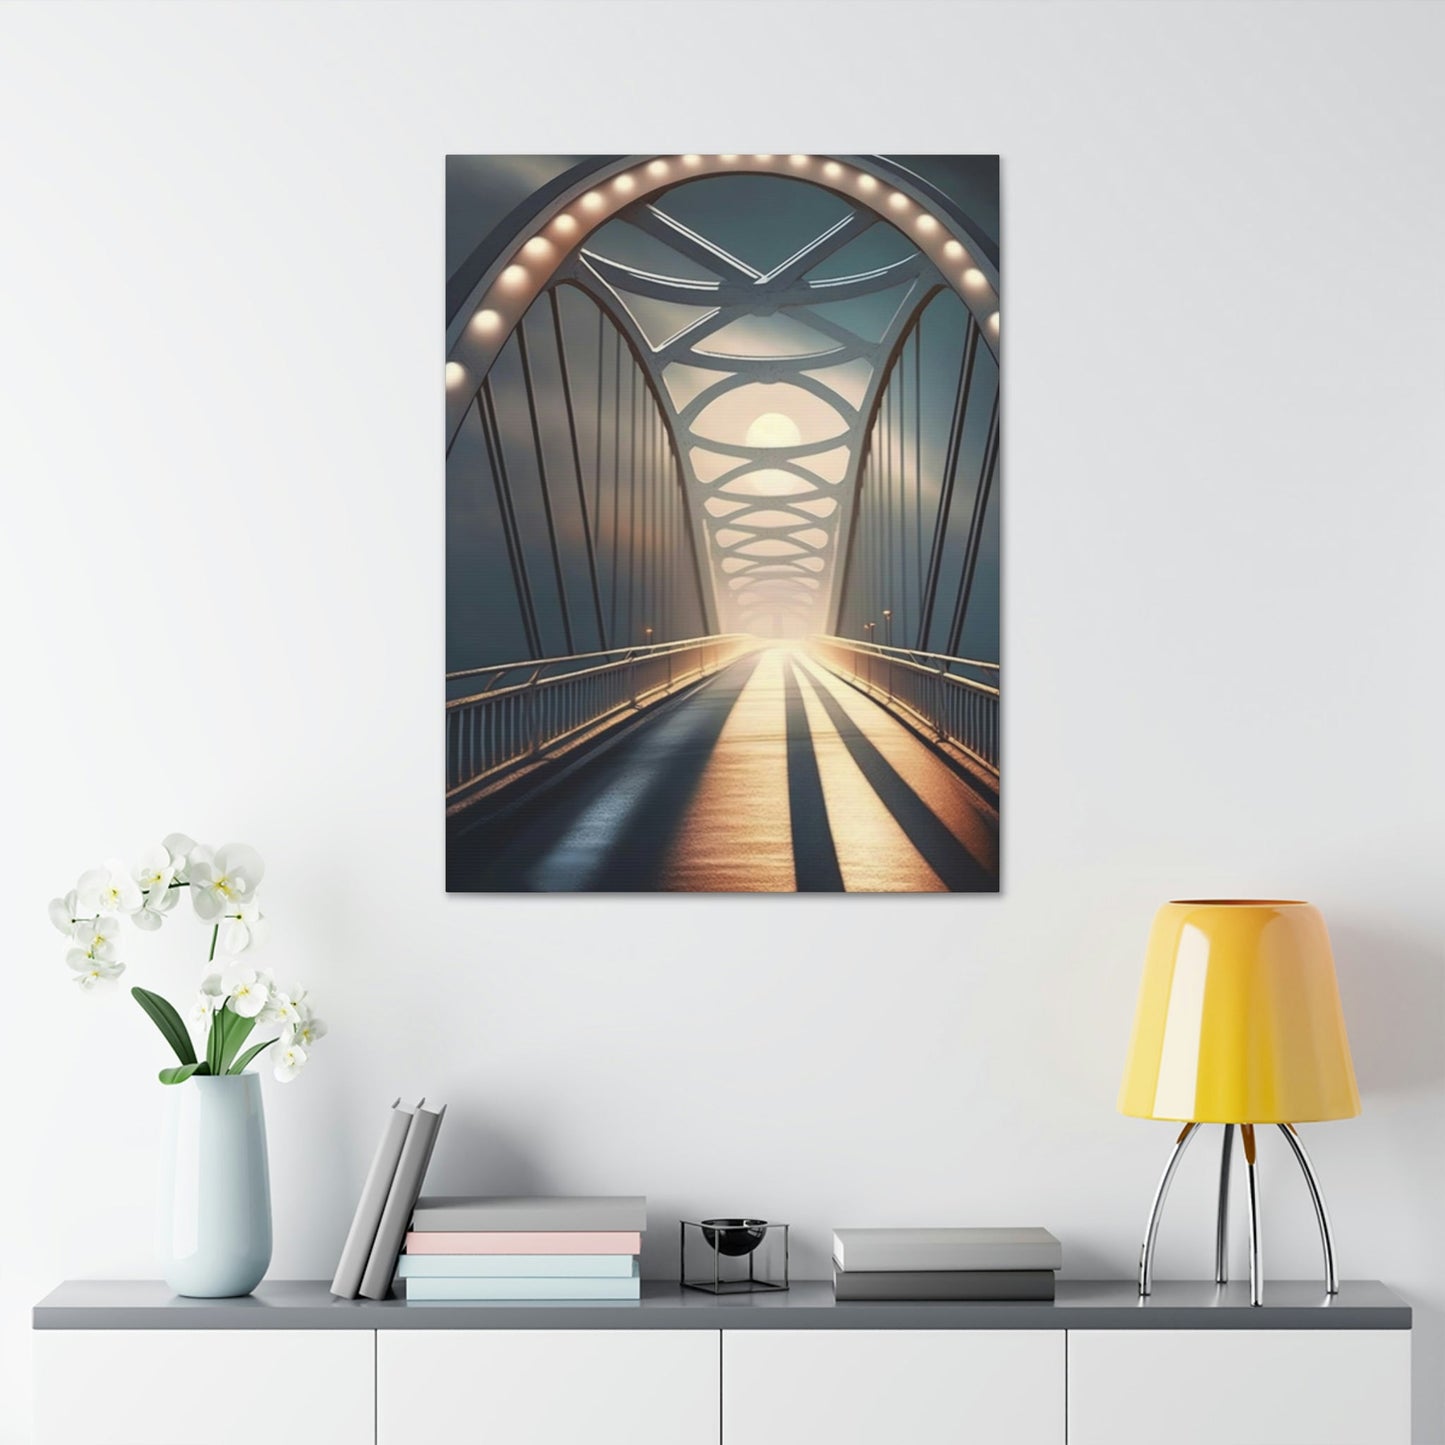 The Graceful Arches: Beautiful Wall Art to Enhance Any Room in Your Home